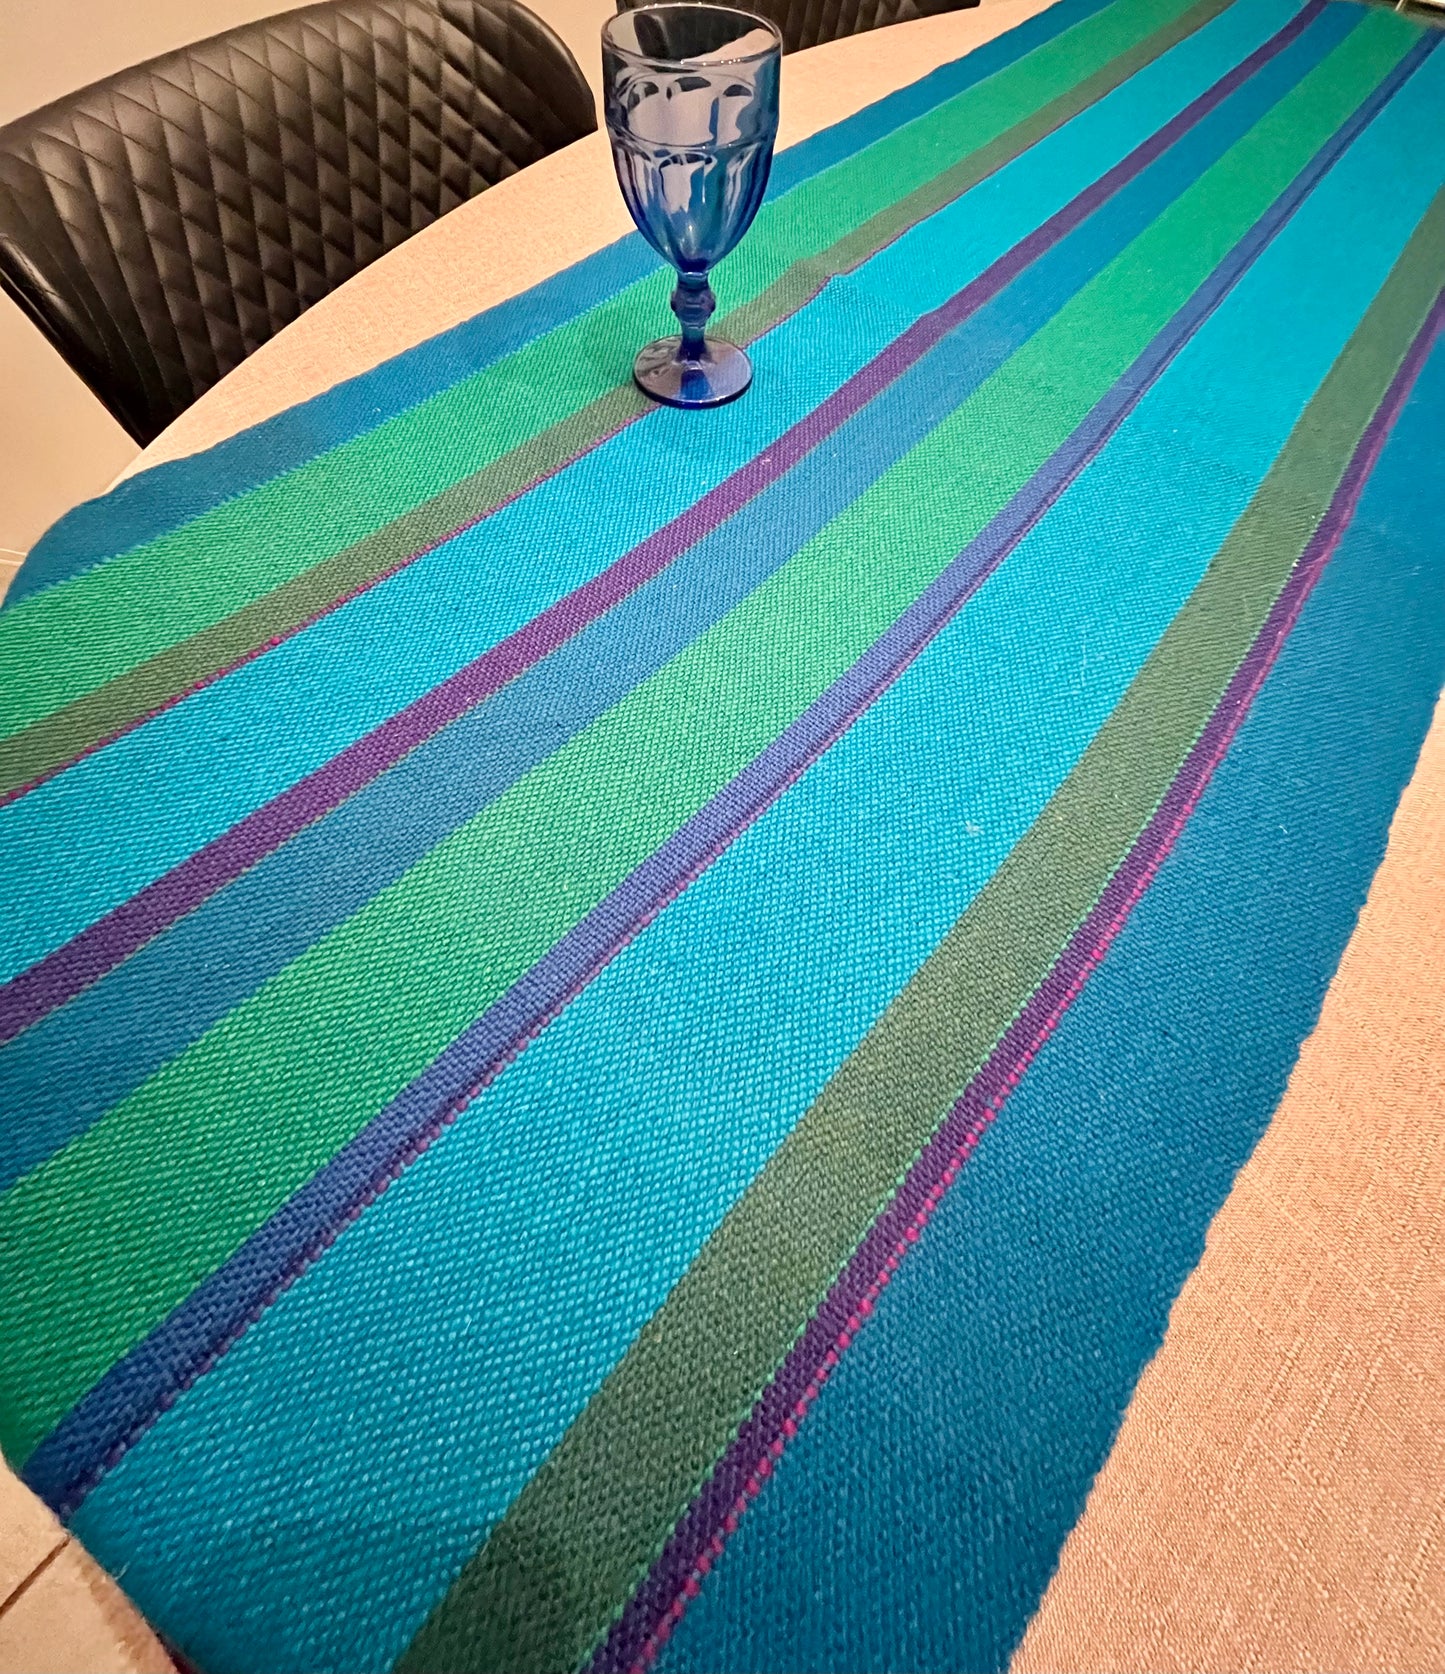 Blue and green table runner